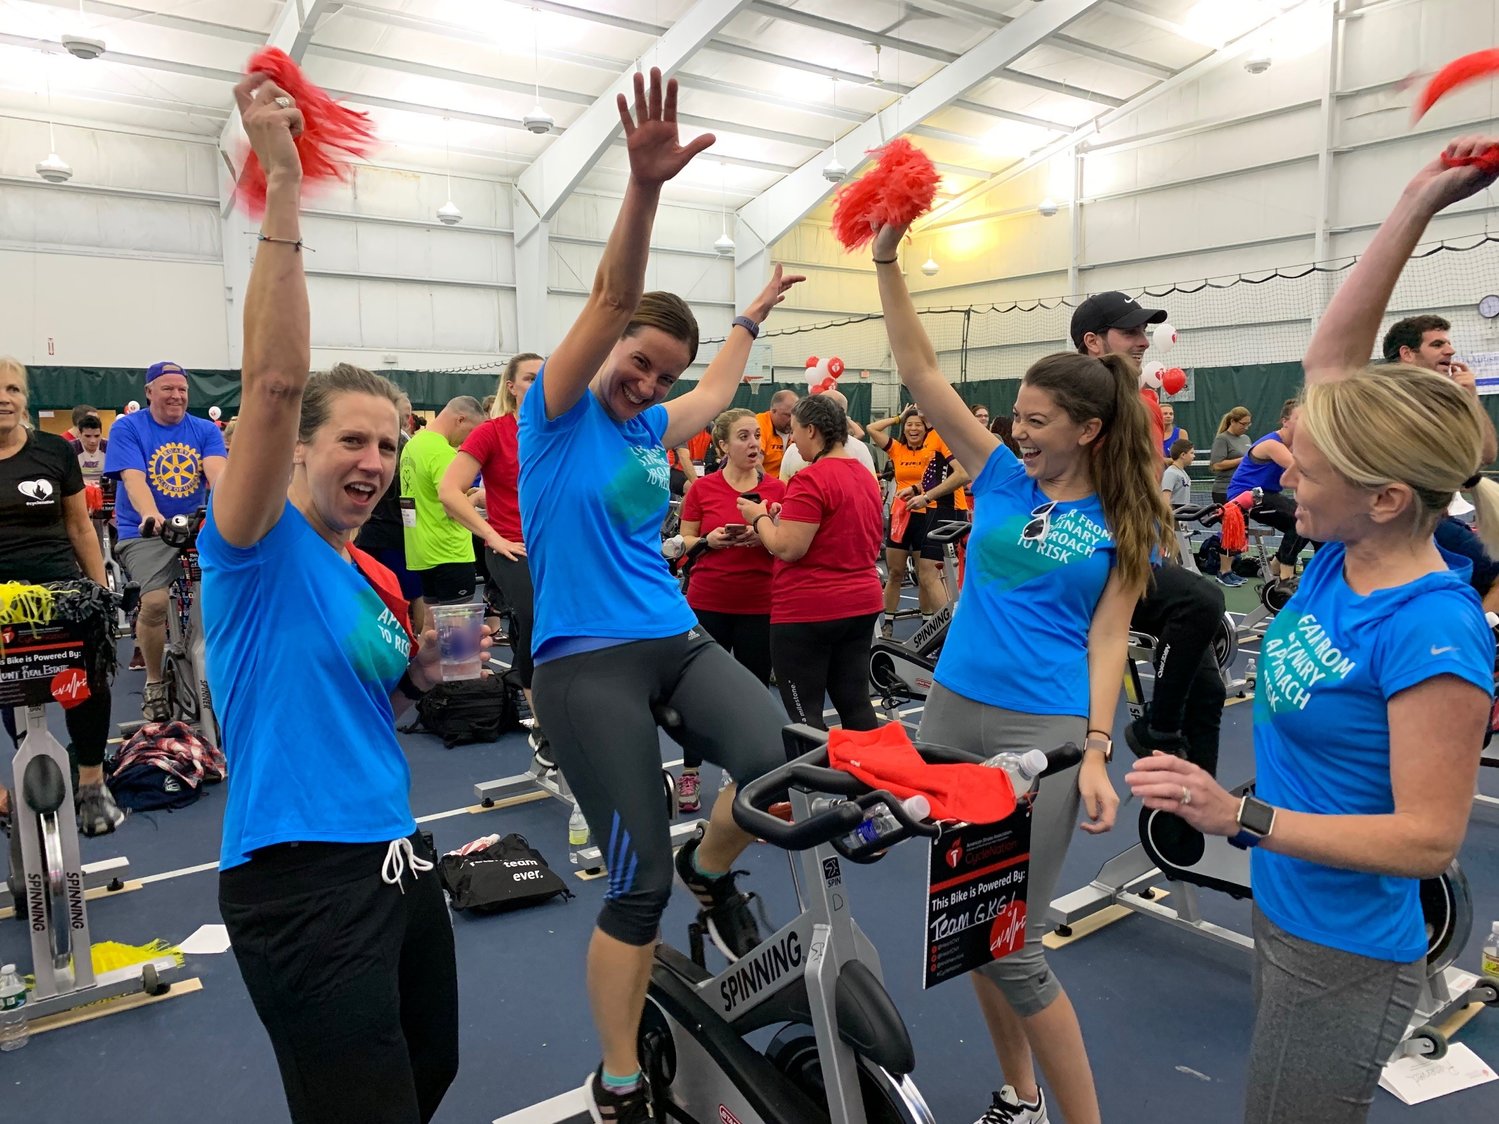 The stationary cycling event CycleNation will again help fight stroke and heart disease Oct. 27 at Carbone Athletics at the Fitness Mill in Utica.